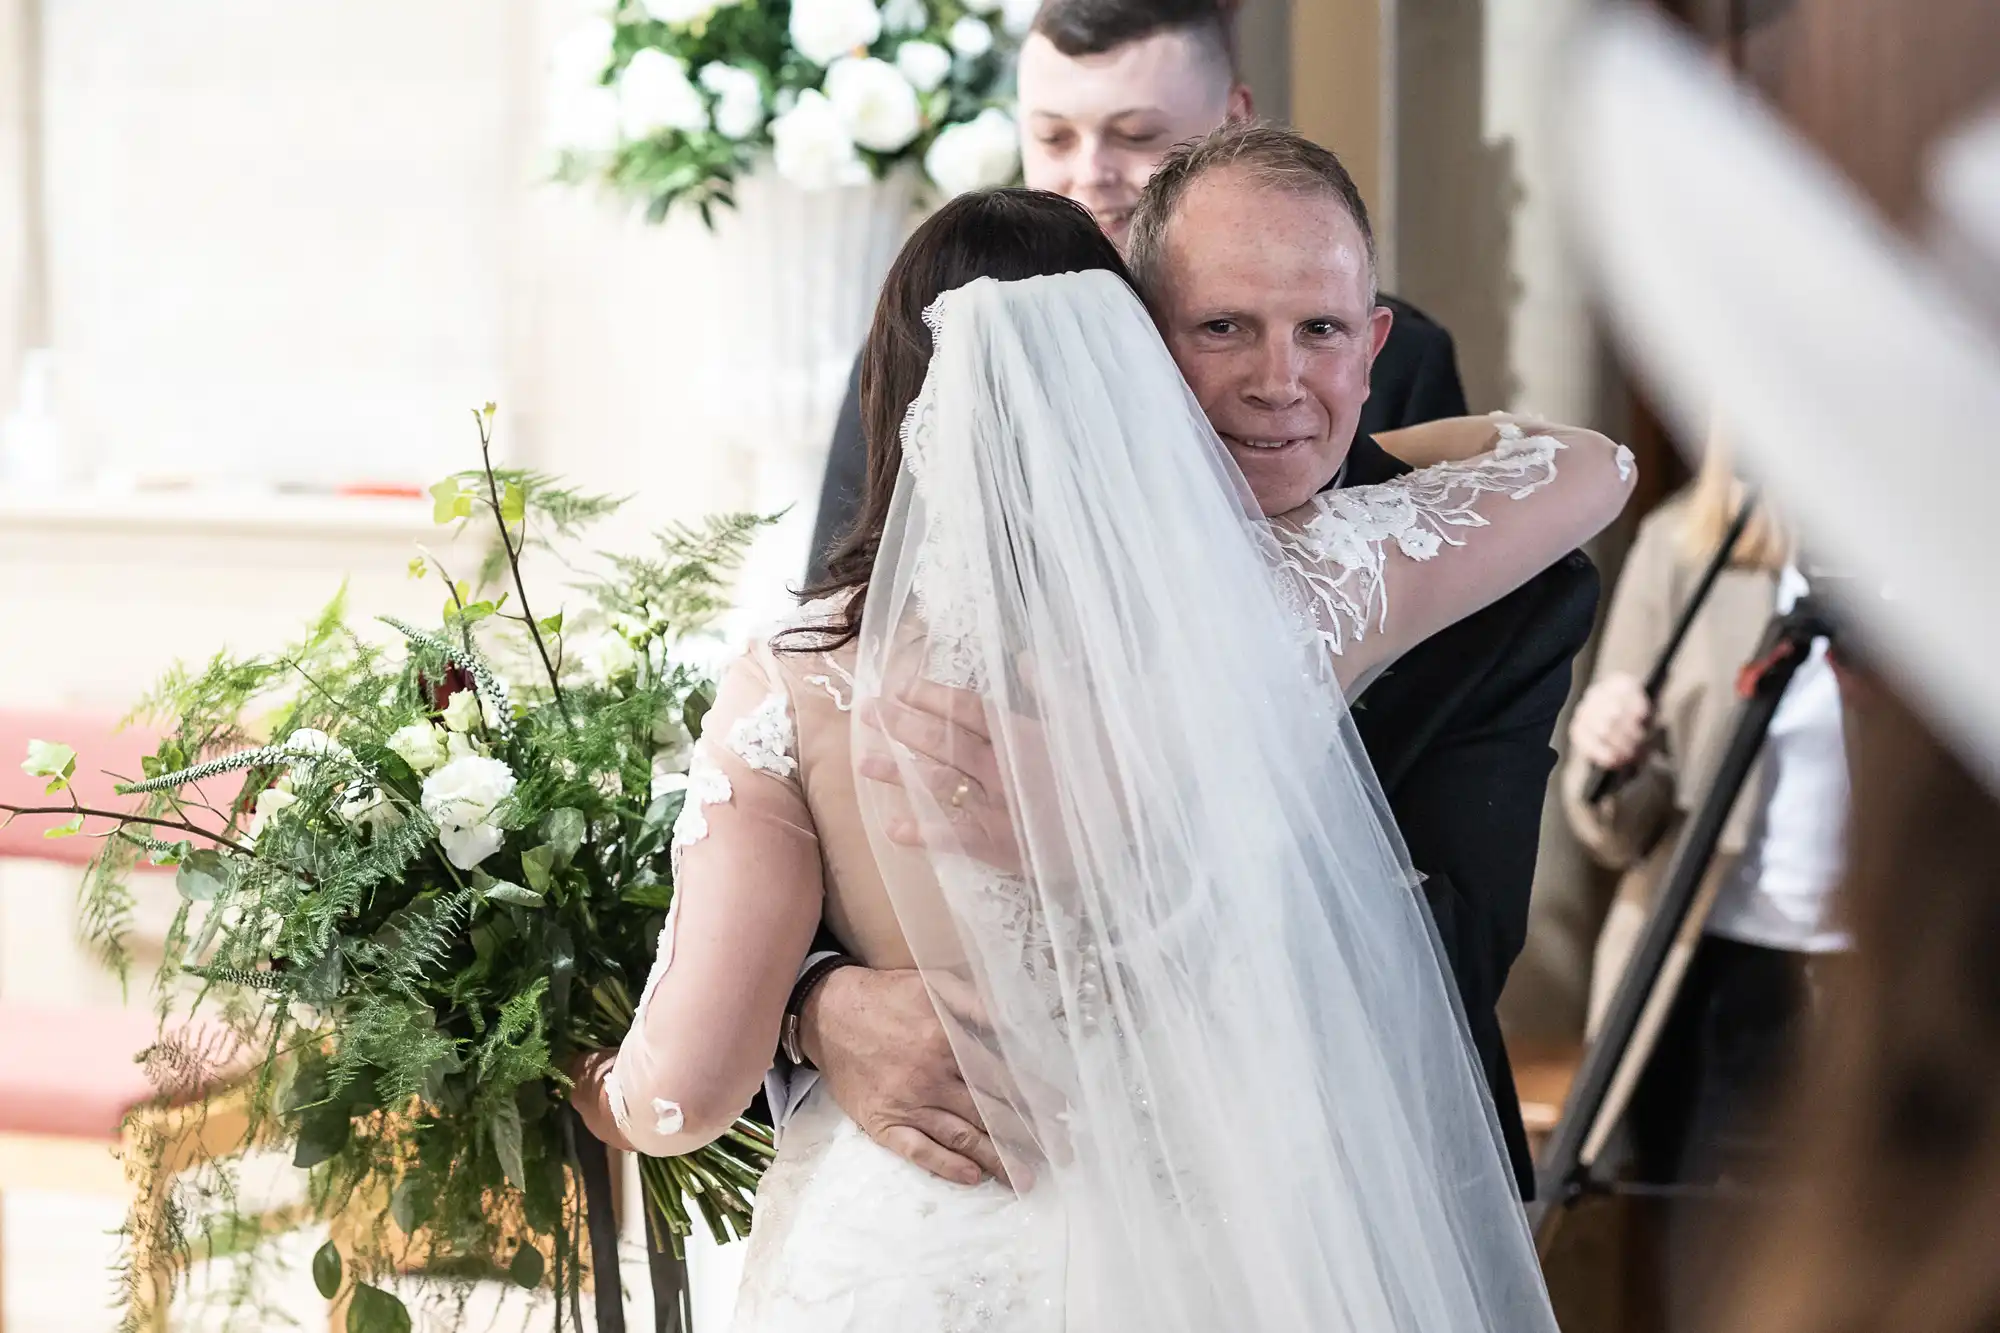 Father emotionally hugs a bride during a wedding ceremony in a church, surrounded by floral decorations.